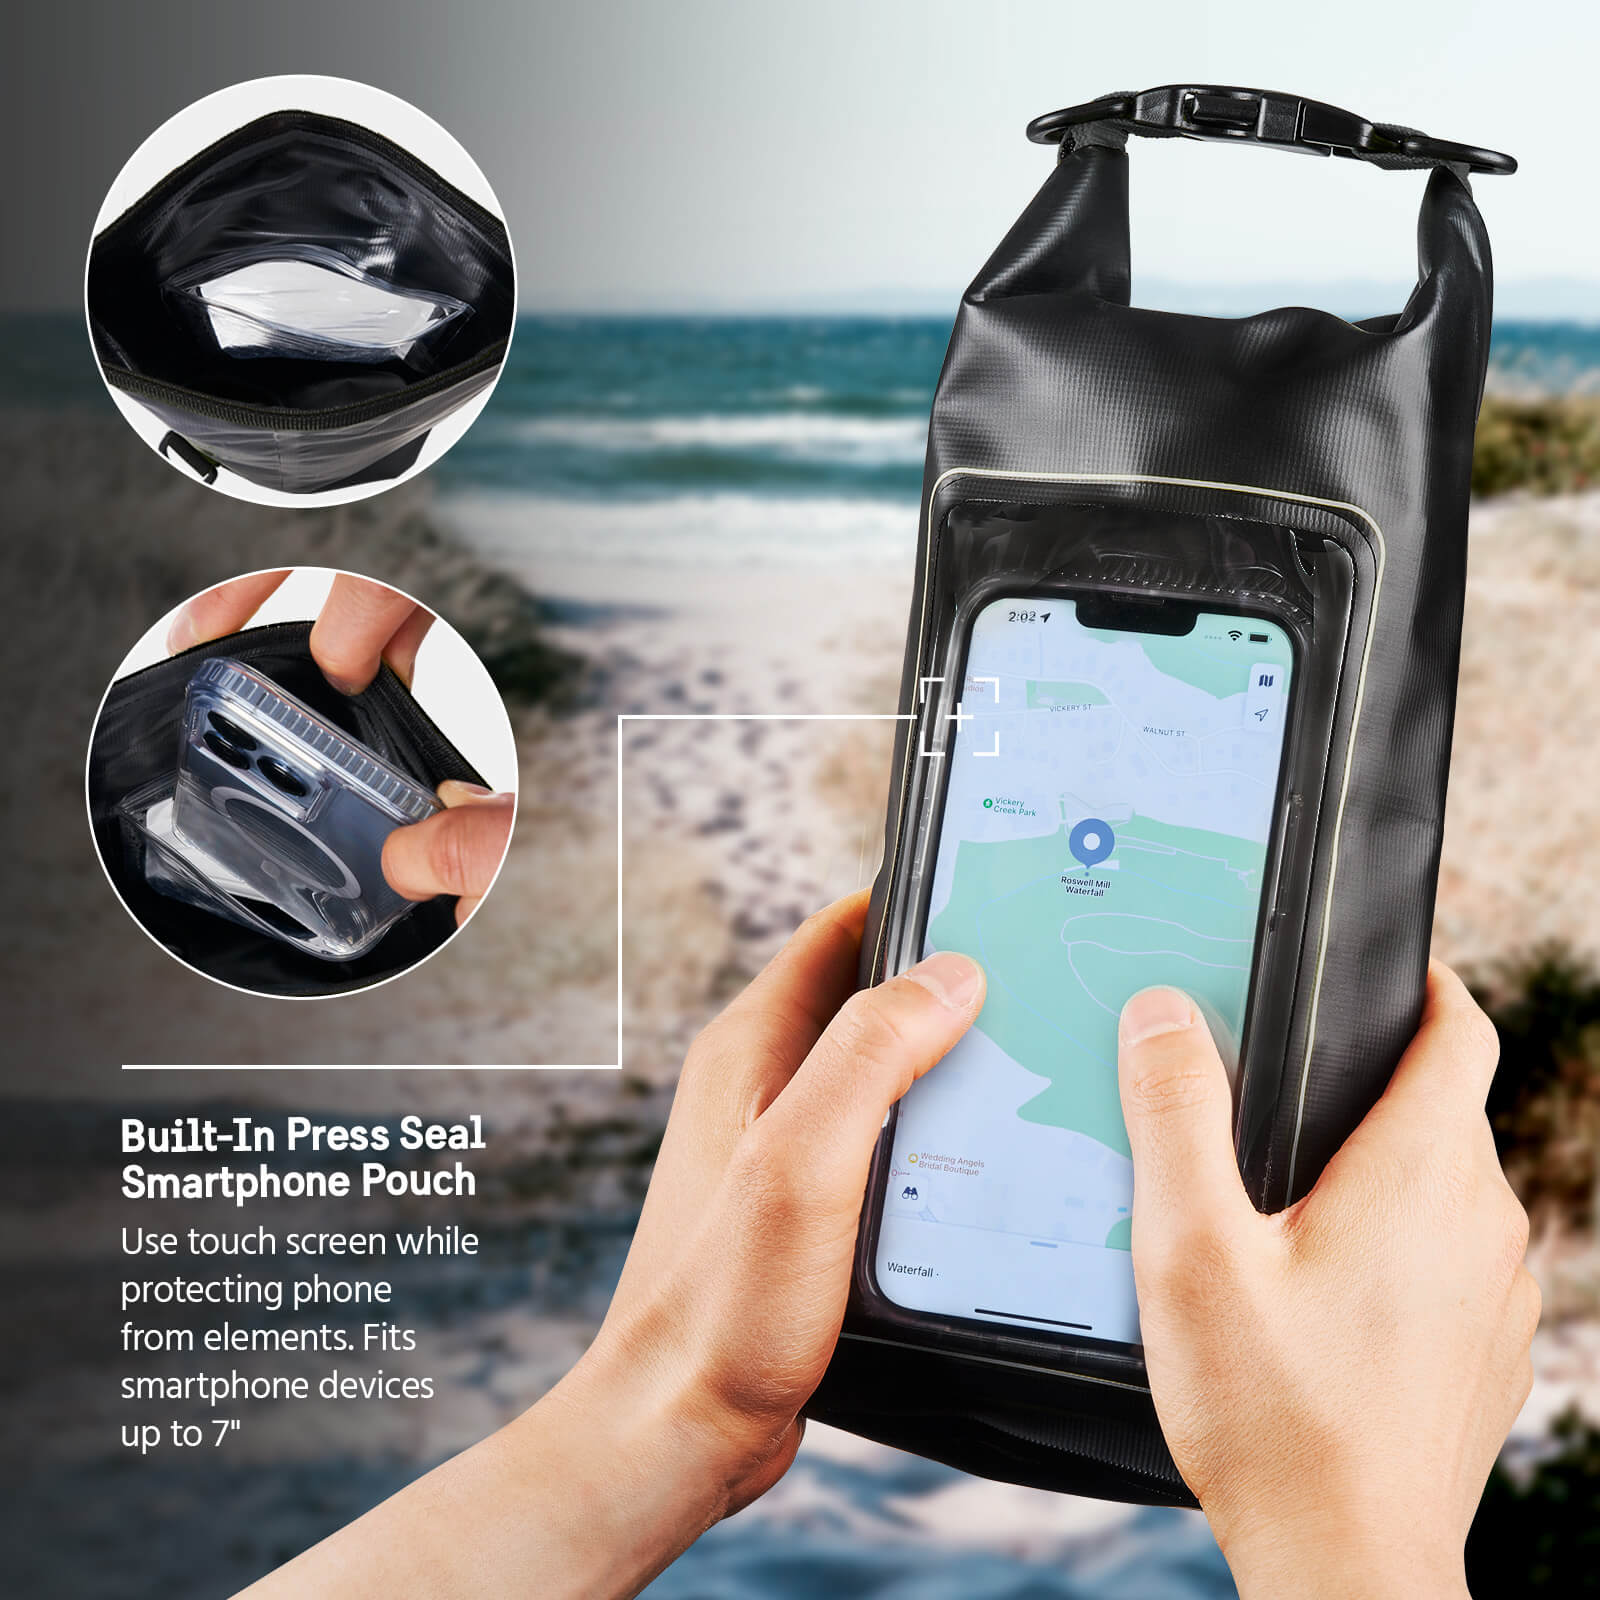 Pelican Marine Waterproof Phone Dry Bag 1P66 Water Resistant. Full Protection against dust, dirt, and other environmental elements. color::Stealth Black